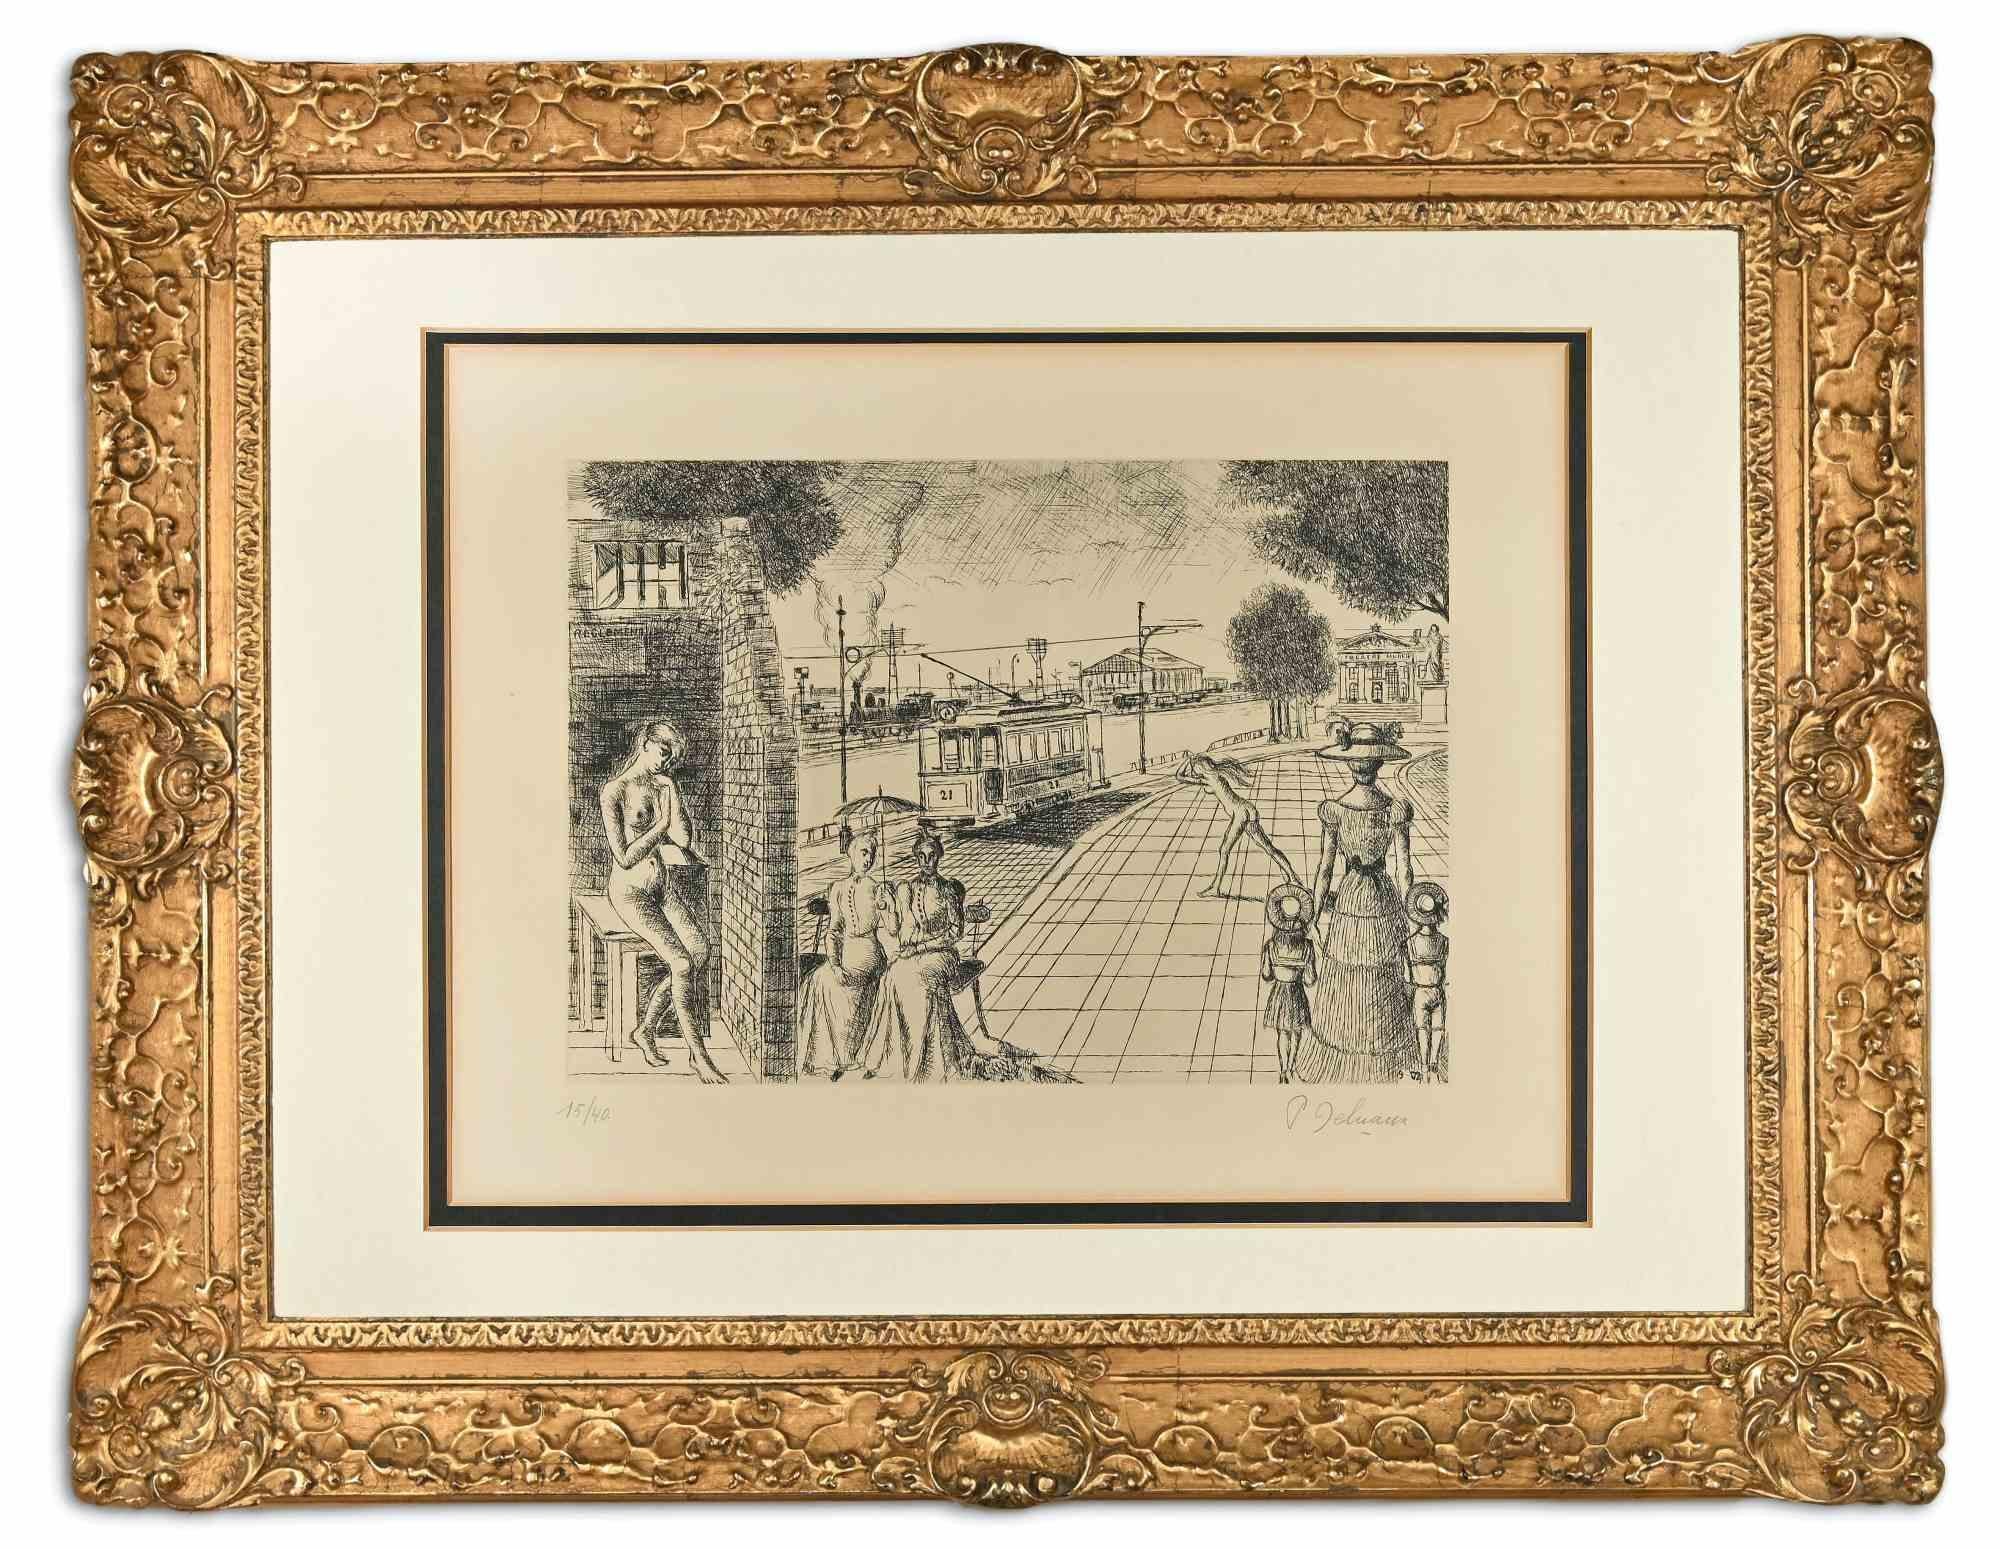  Entracte is an original modern artwork realized by Paul Delvaux in 1975.

Black and white etching on vélin d'Auvergne du Moulin Richard de Bas.

Hand signed and numbered on the lower margin.

Edition of 15/40.

The artwork belongs to the suite